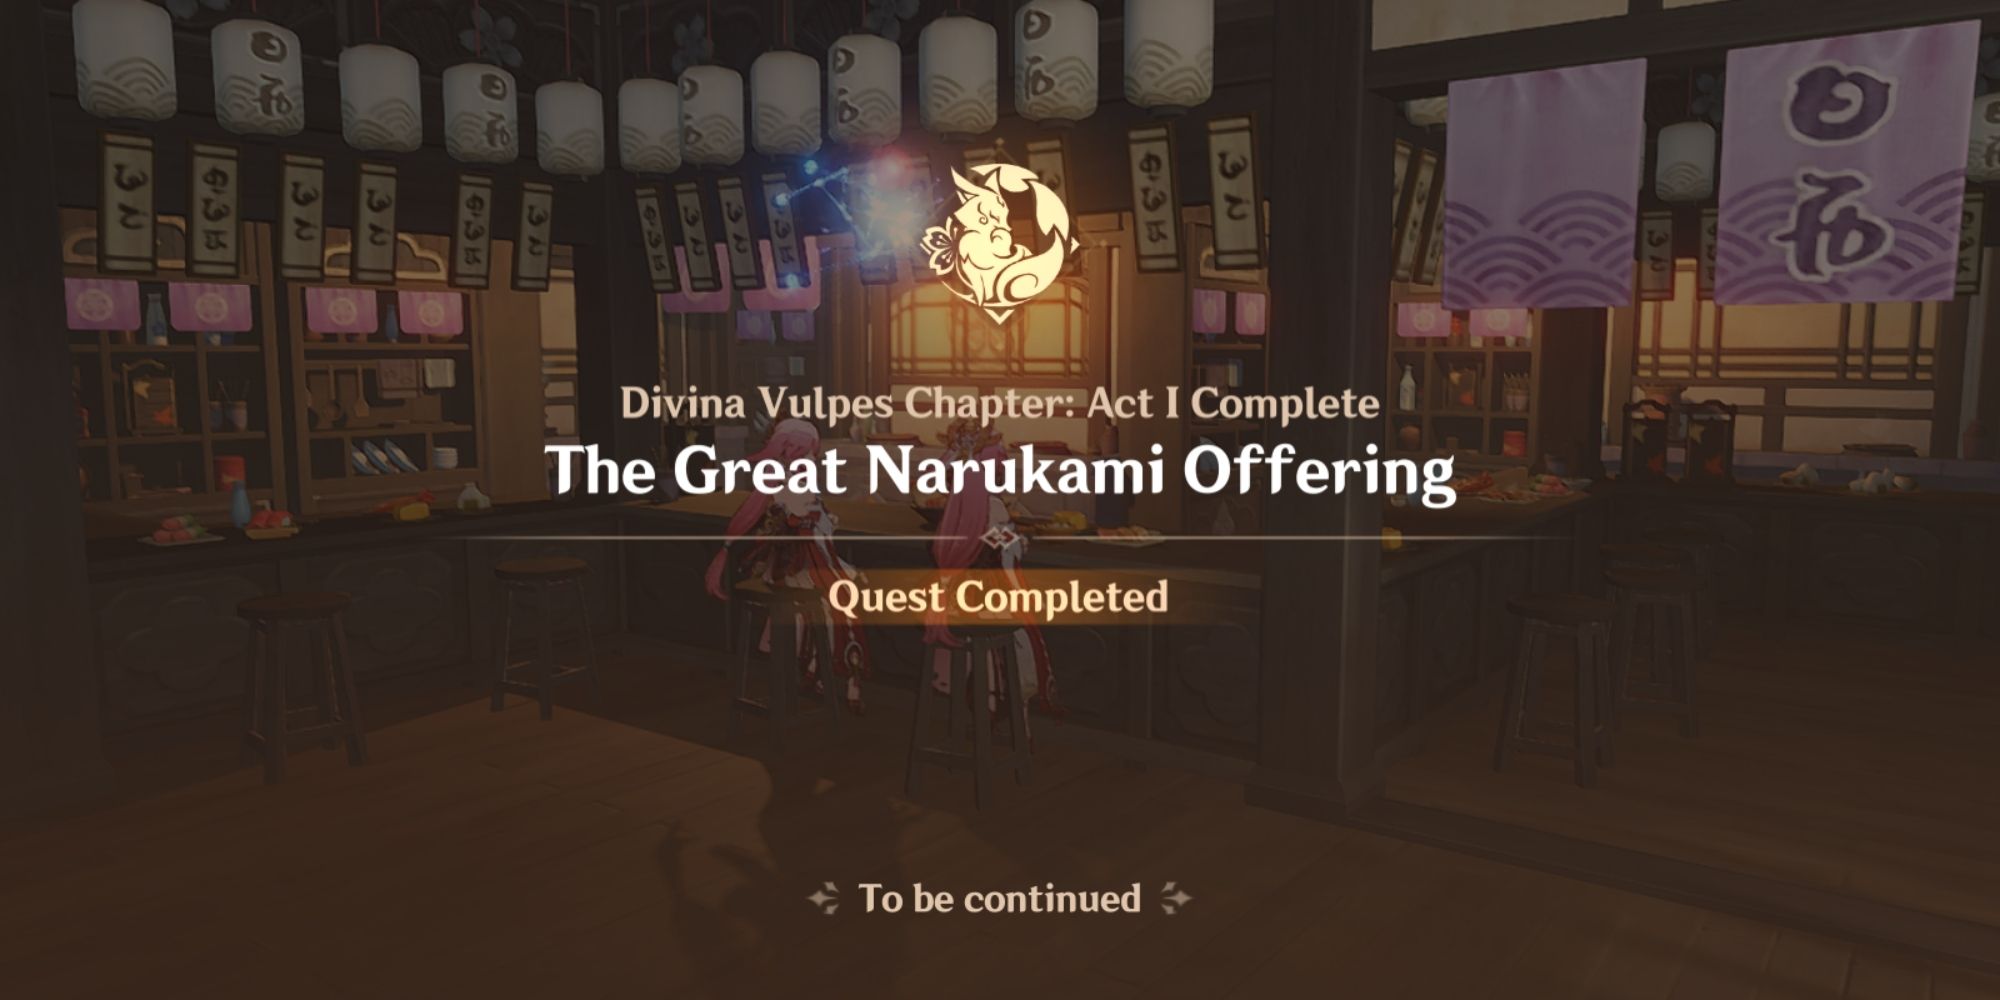 Divina Vulpes chapter - Act I complete